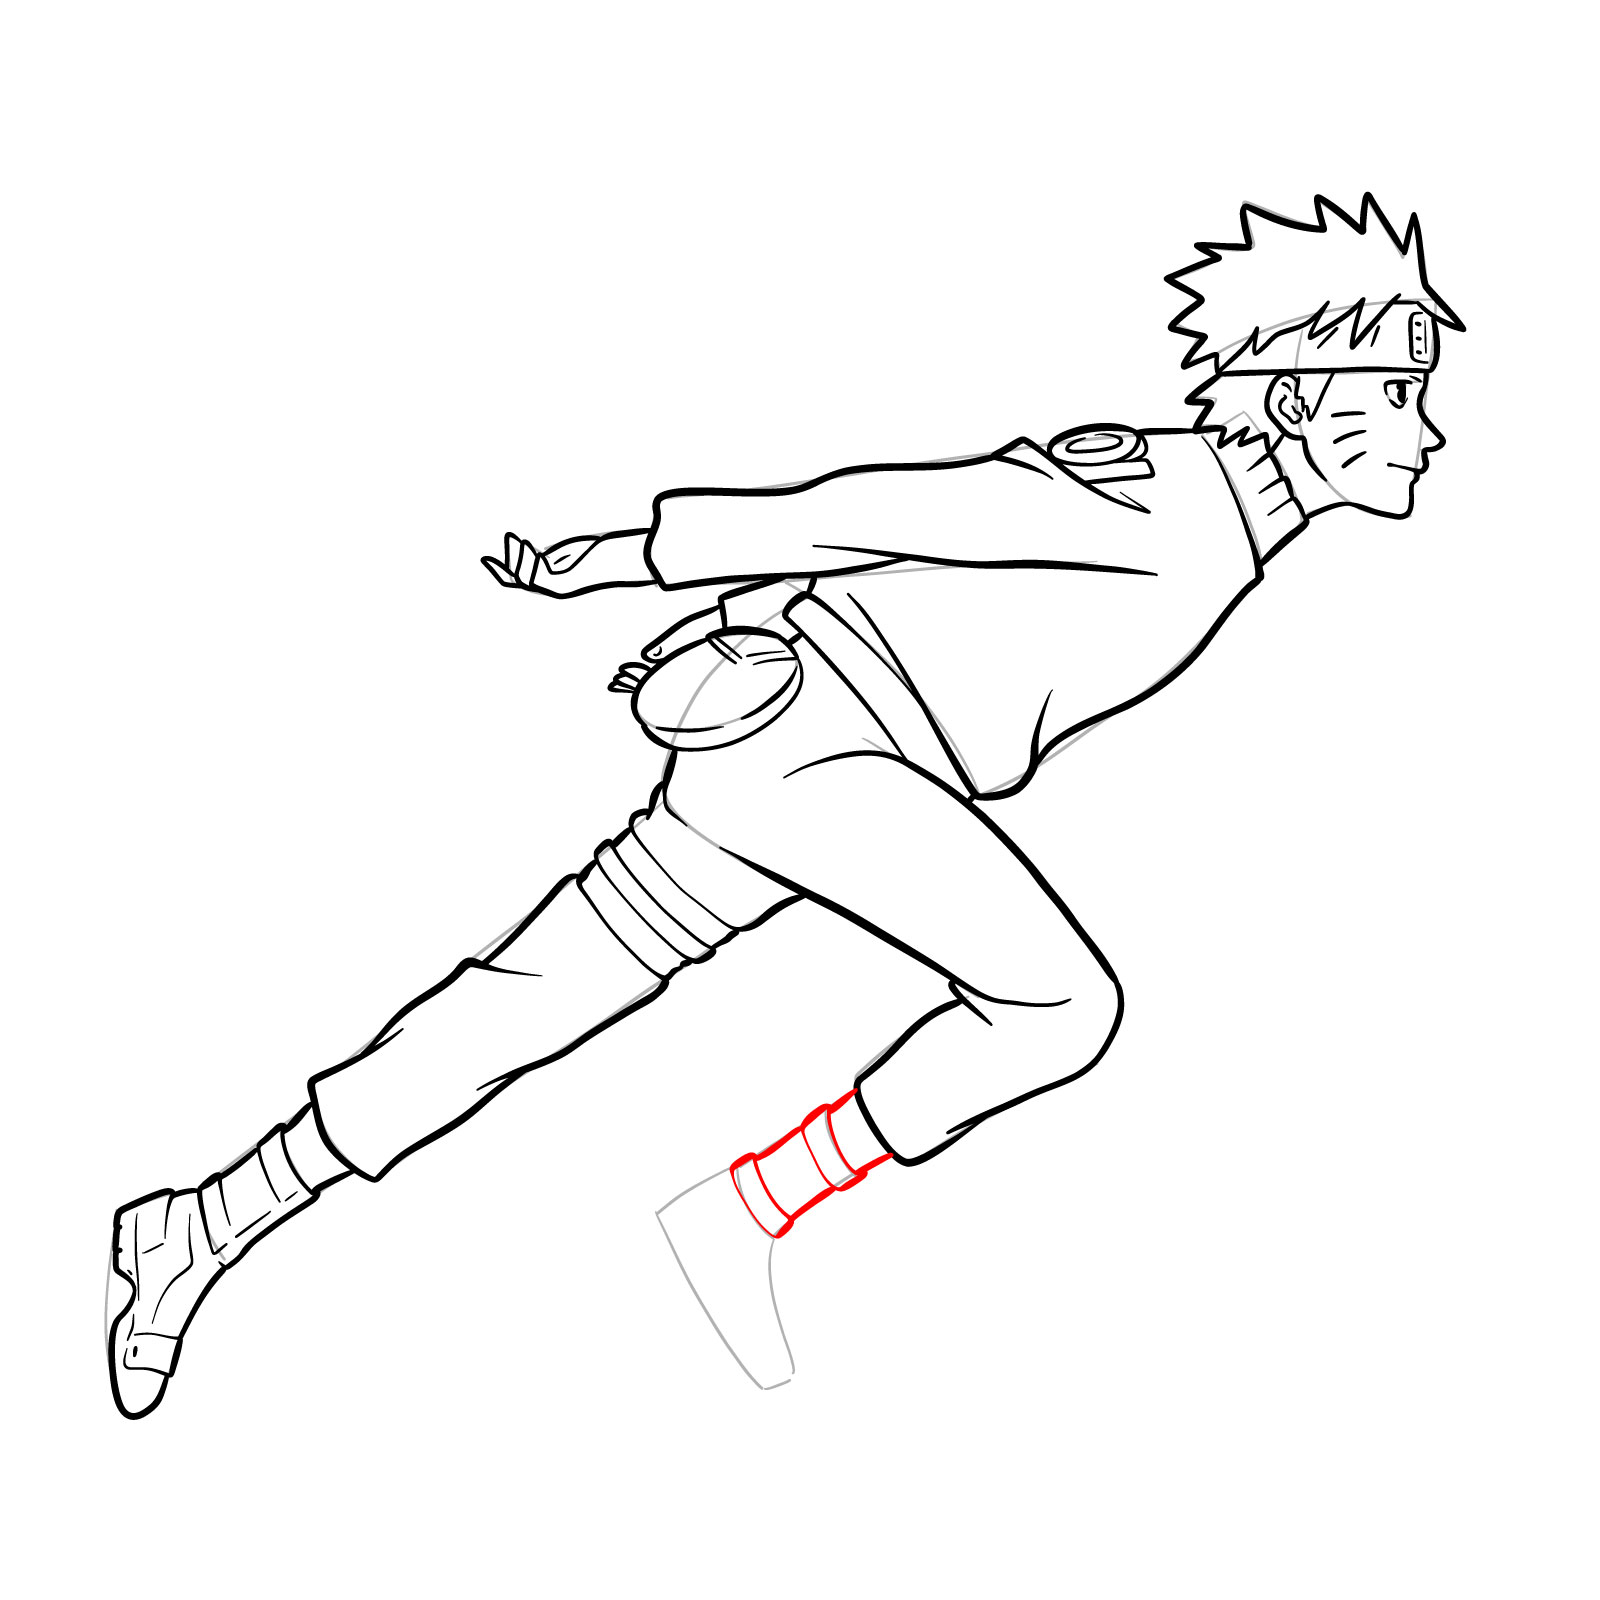 How to draw Naruto running - step 35